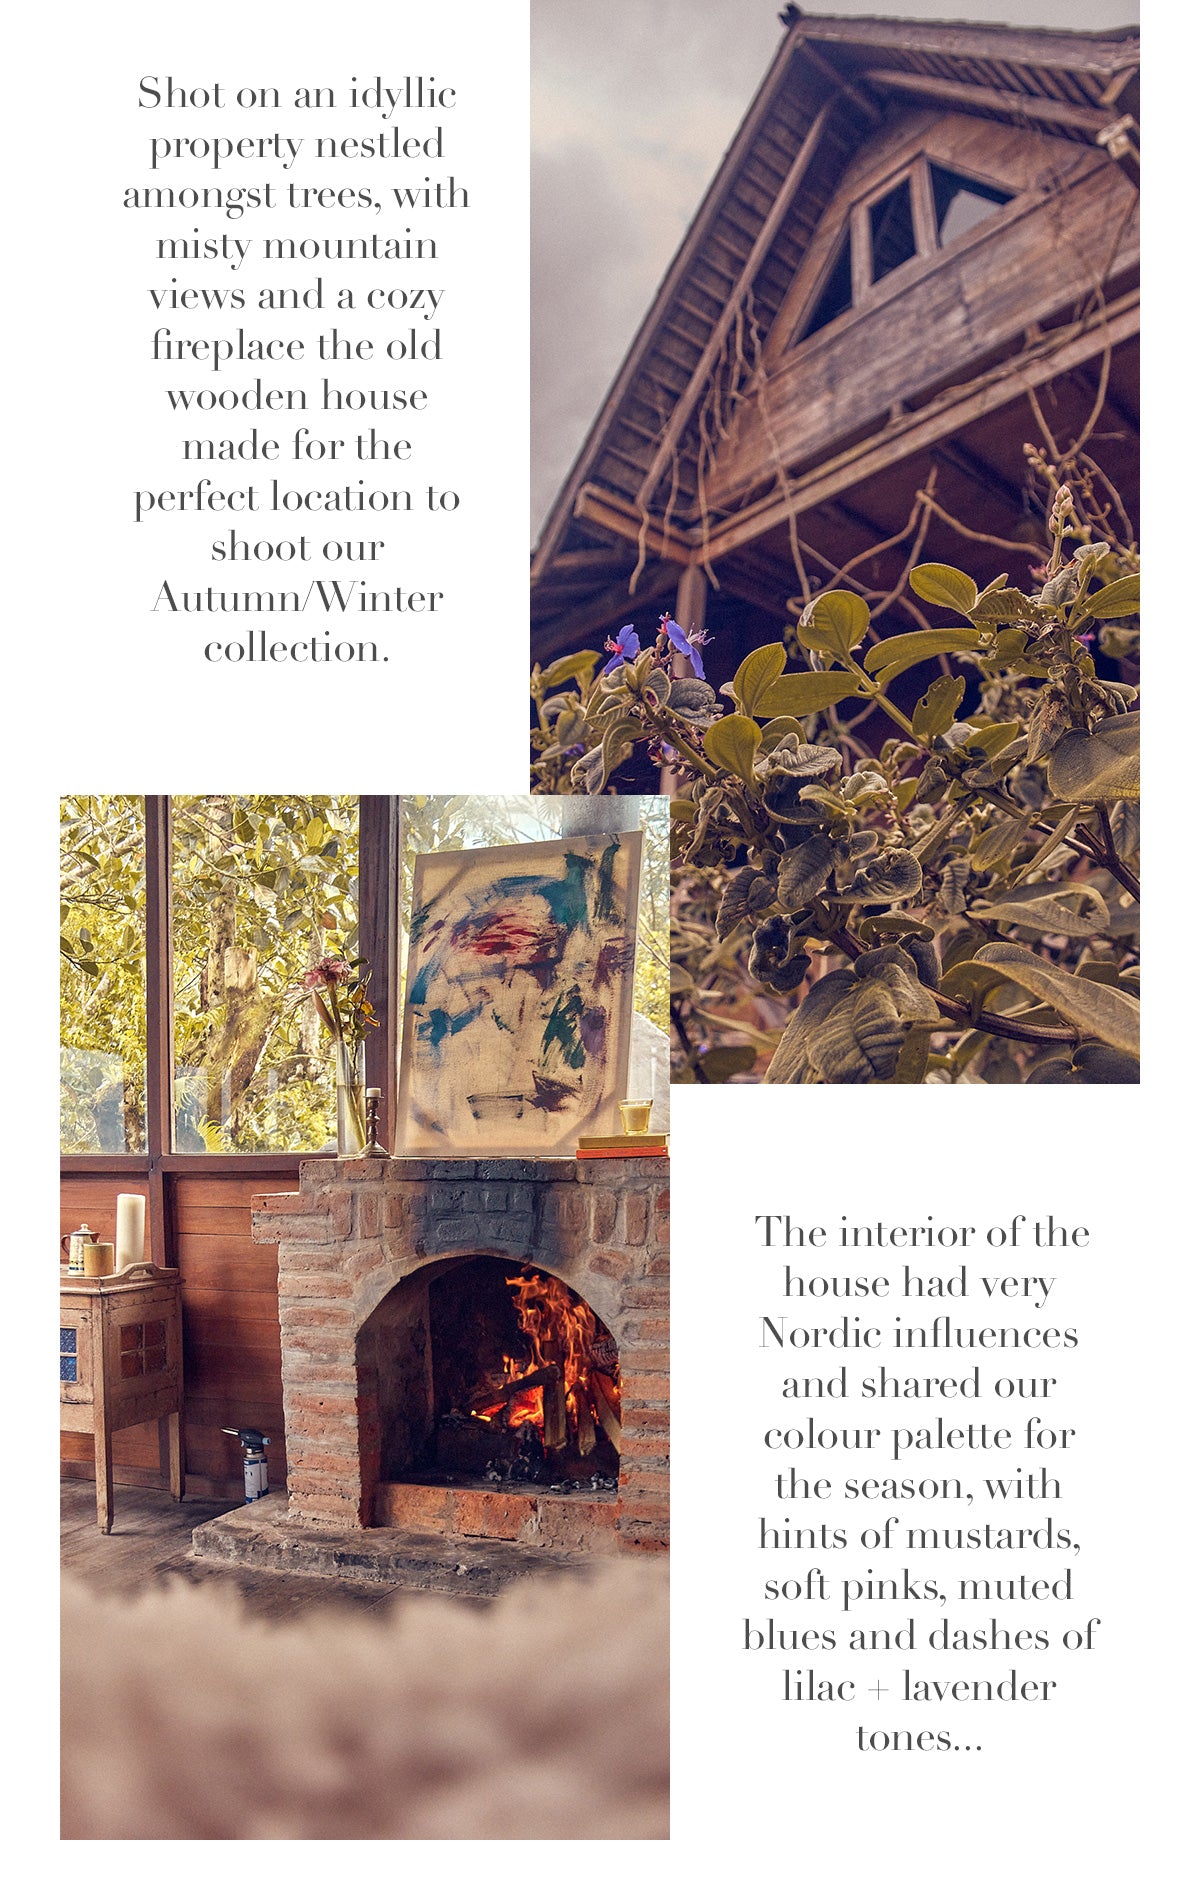 Shot on an idyllic property nestled amongst trees, with misty mountain views and a cozy fireplace the old wooden house made for the perfect location to shoot our Autumn/Winter collection.